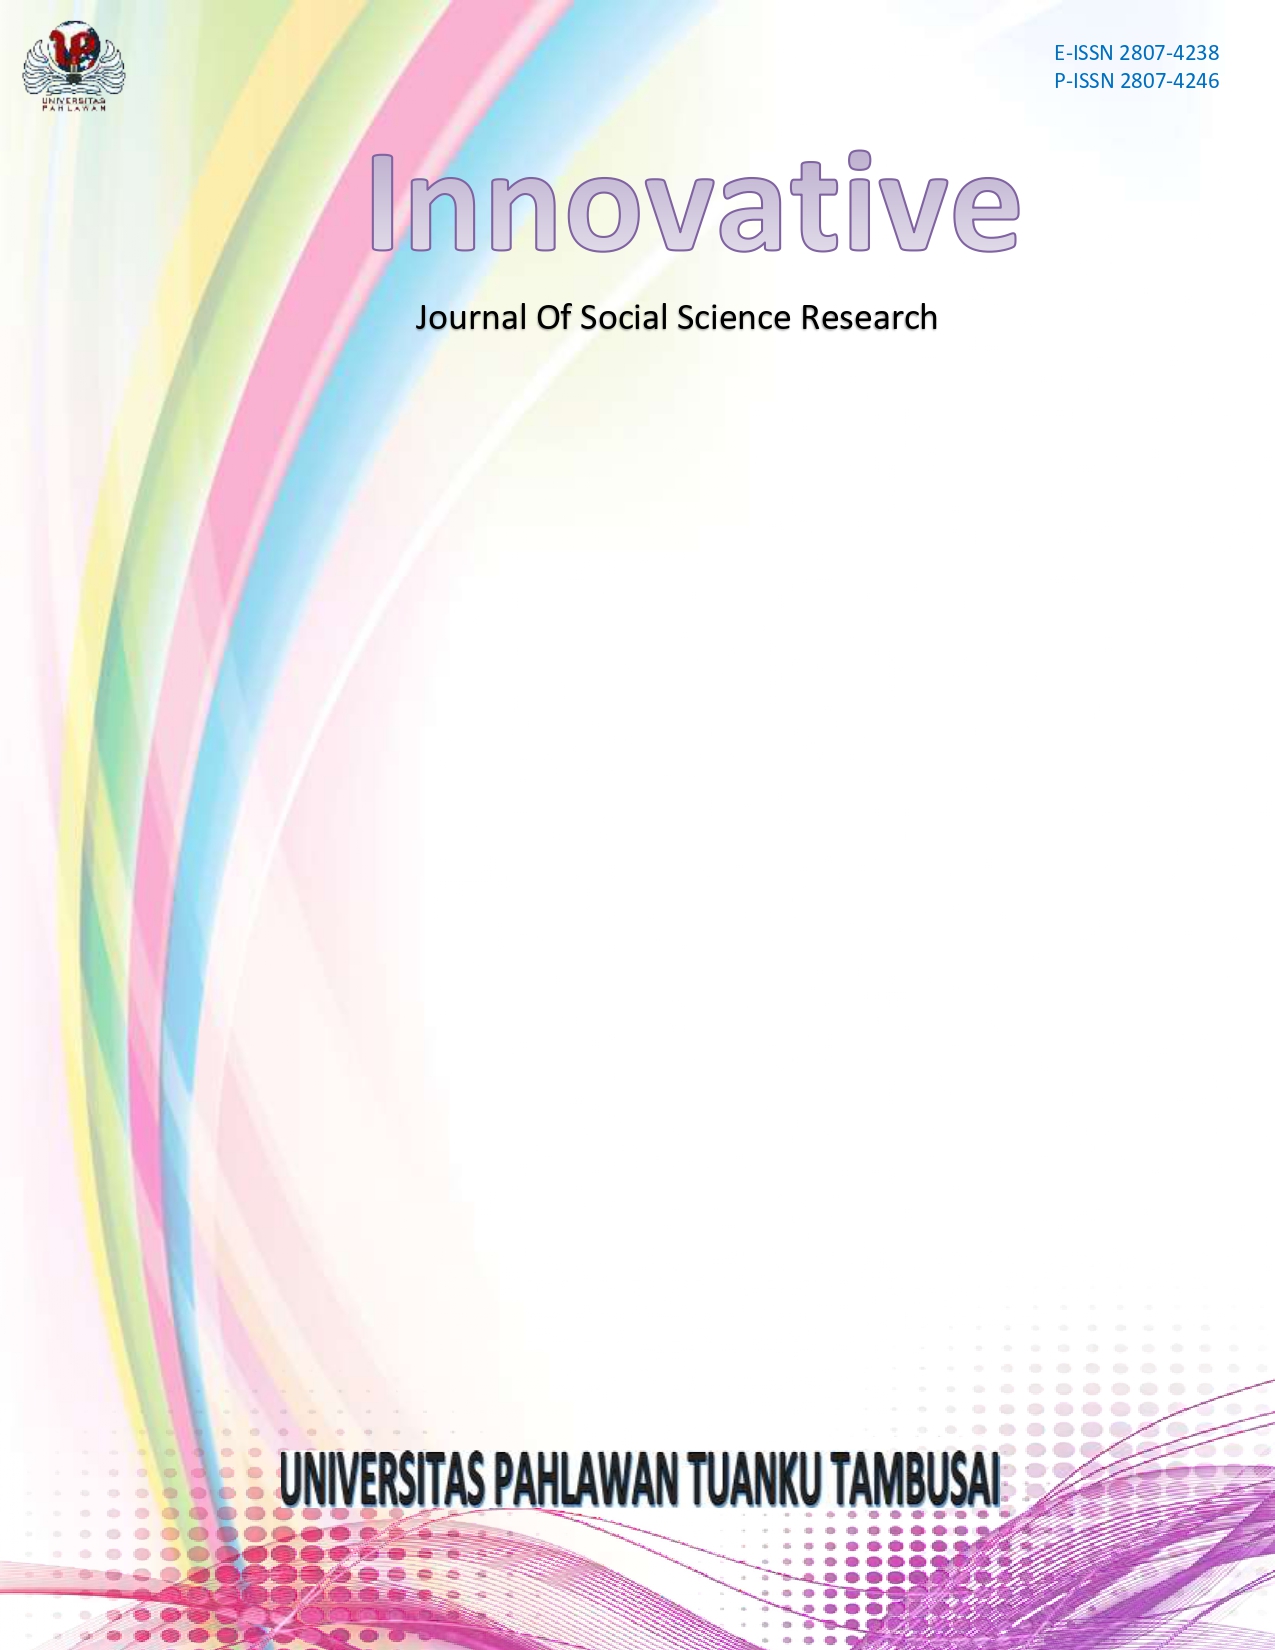 					View Vol. 1 No. 1 (2021): Innovative: Journal Of Social Science Research
				